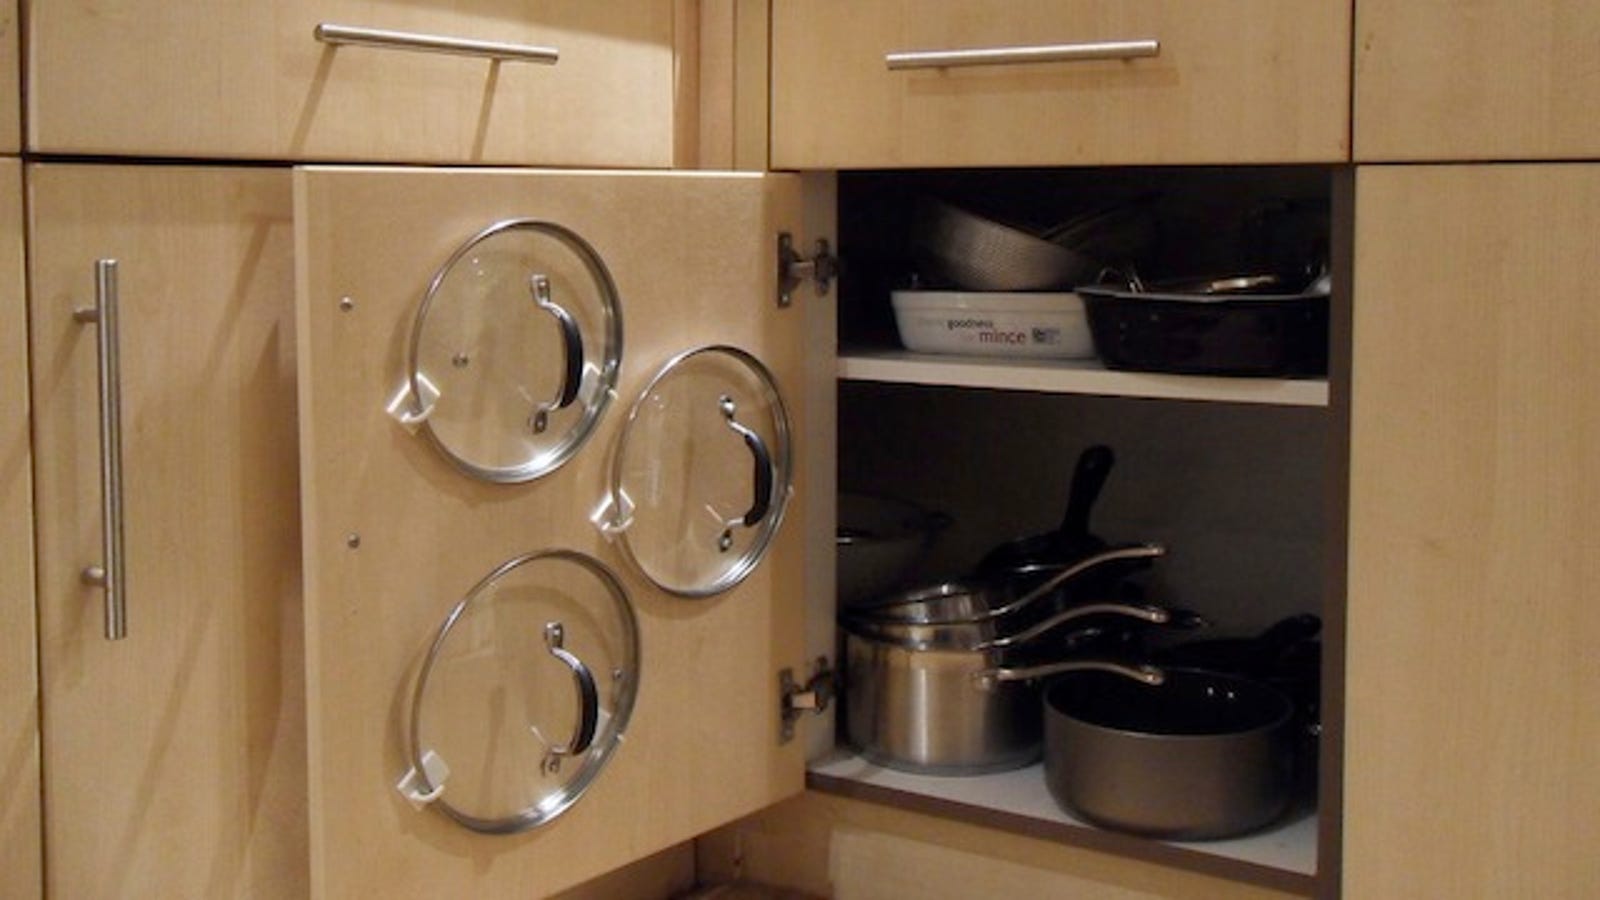 Use Adhesive Hooks to Organize Your Pot Lids and Save Cabinet Space